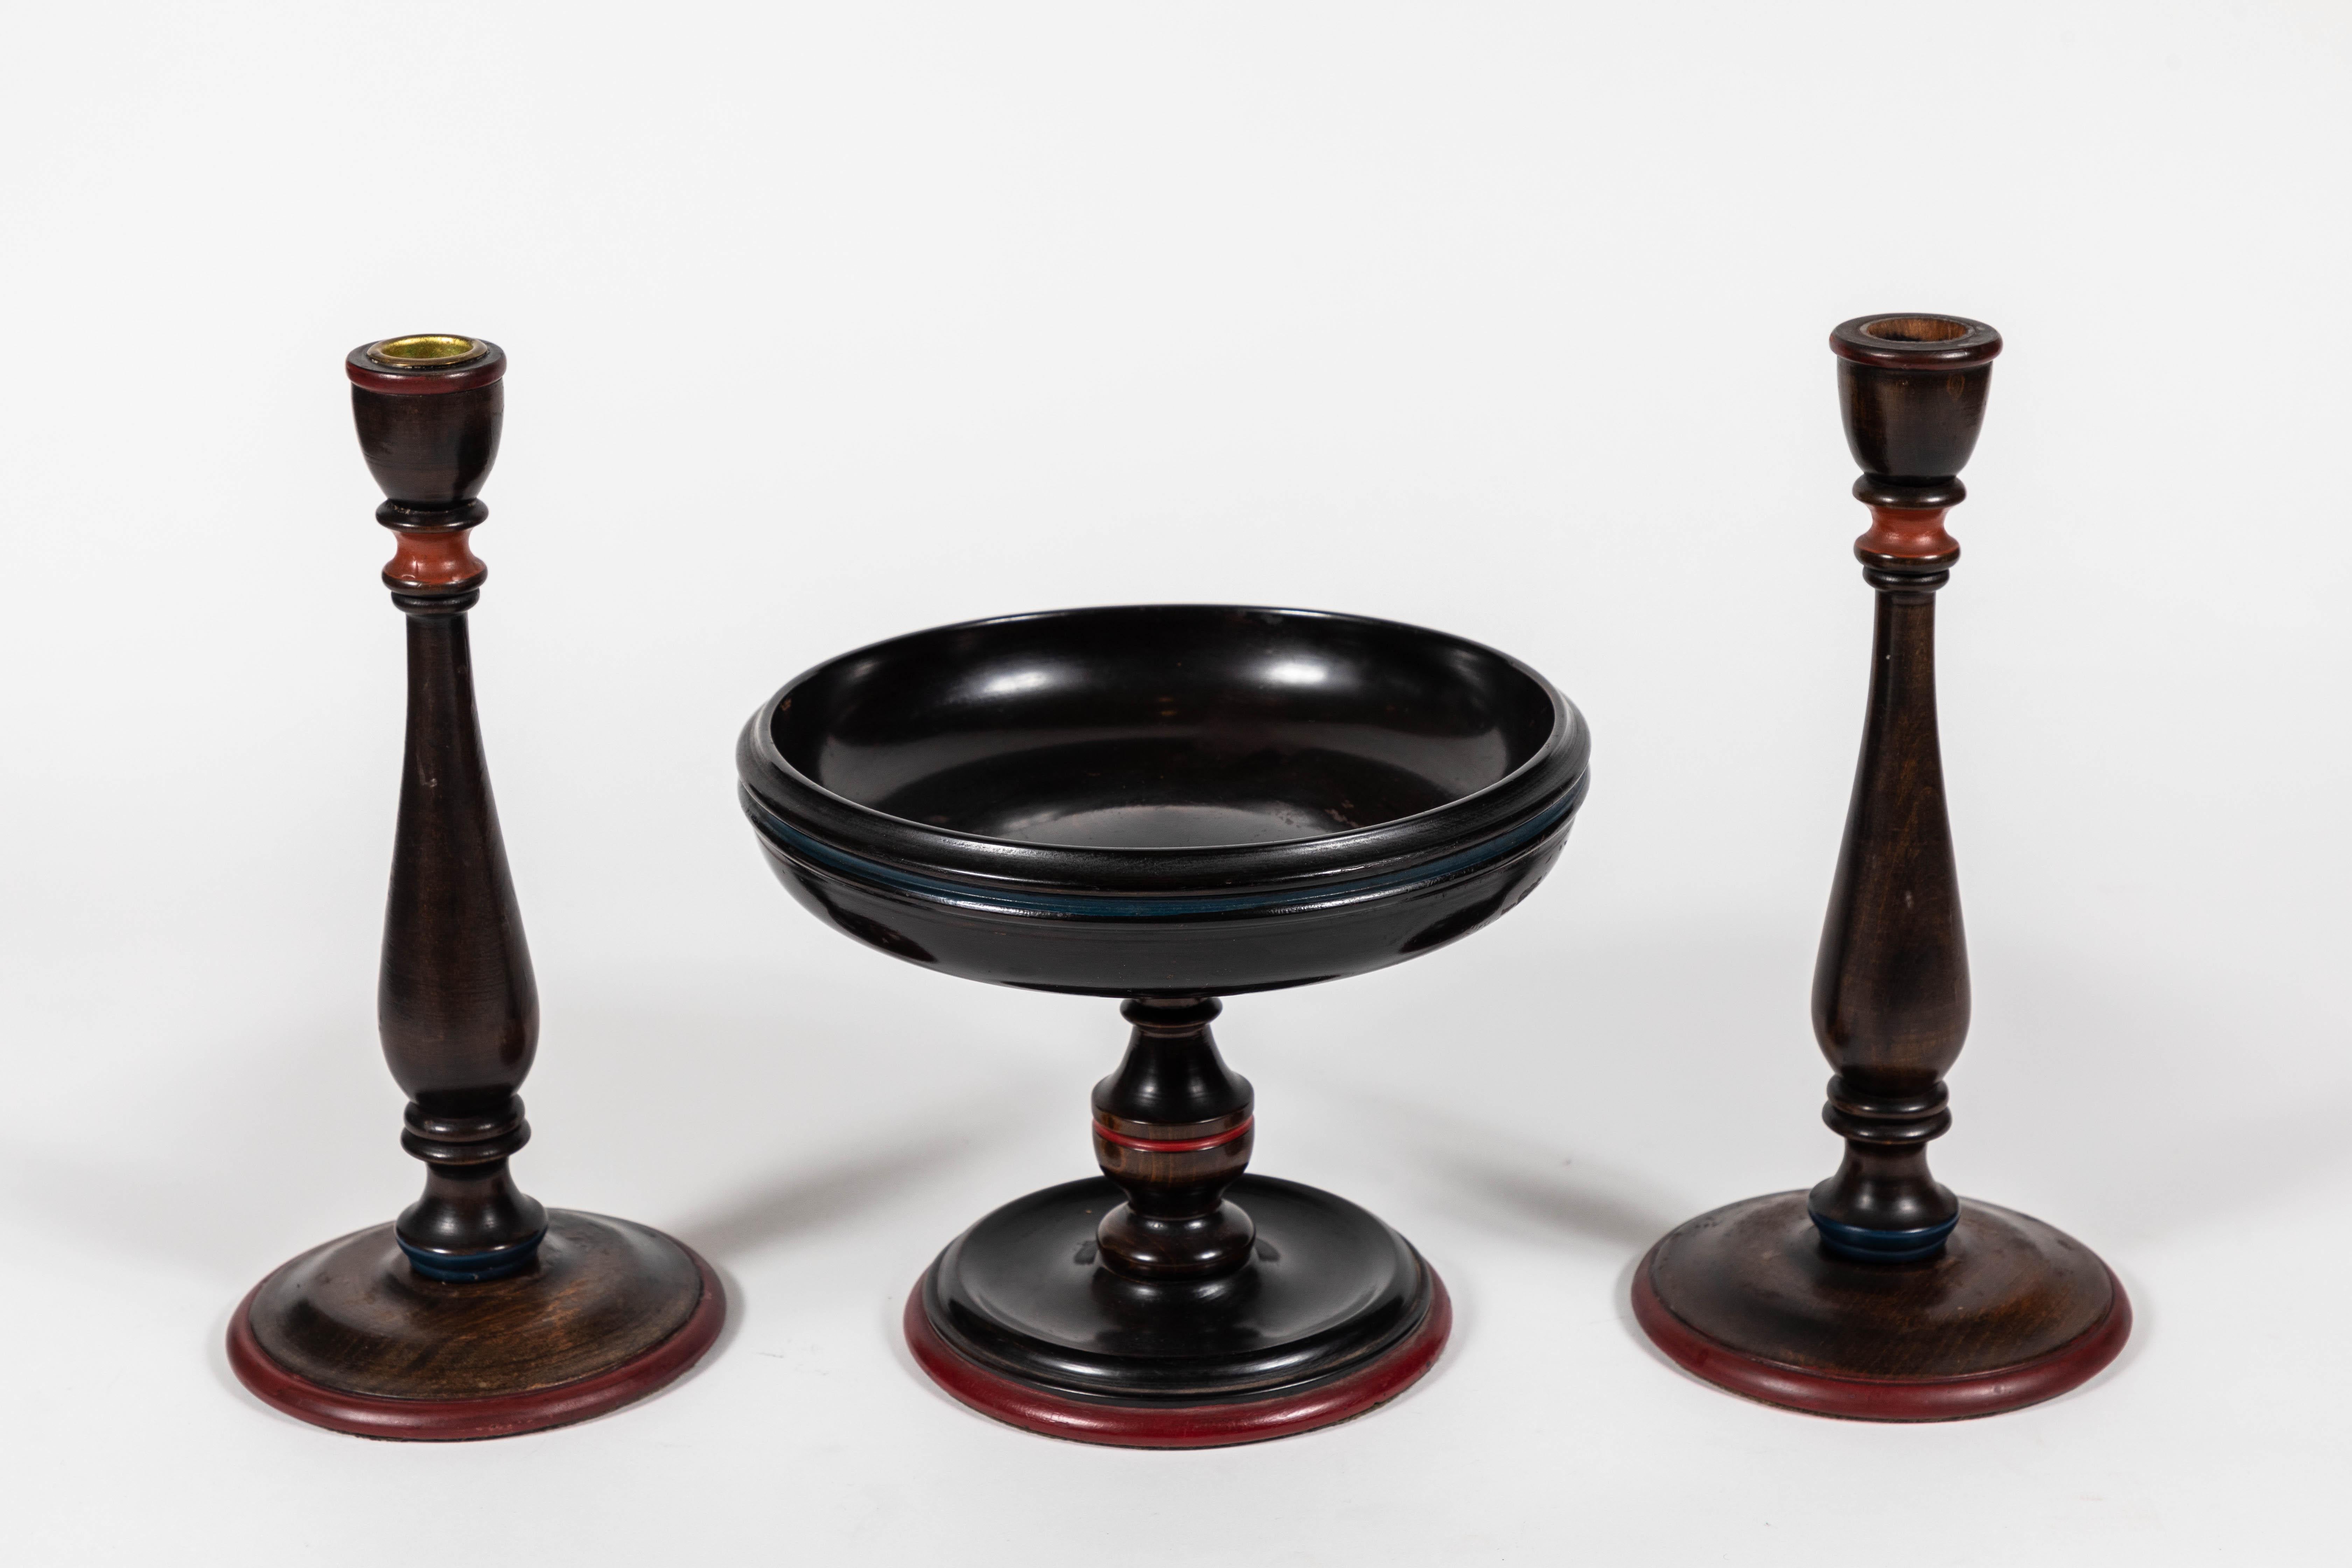 Antique turned wood console set with centre display footed bowl and candlesticks.

Measures: Footed bowl: 9